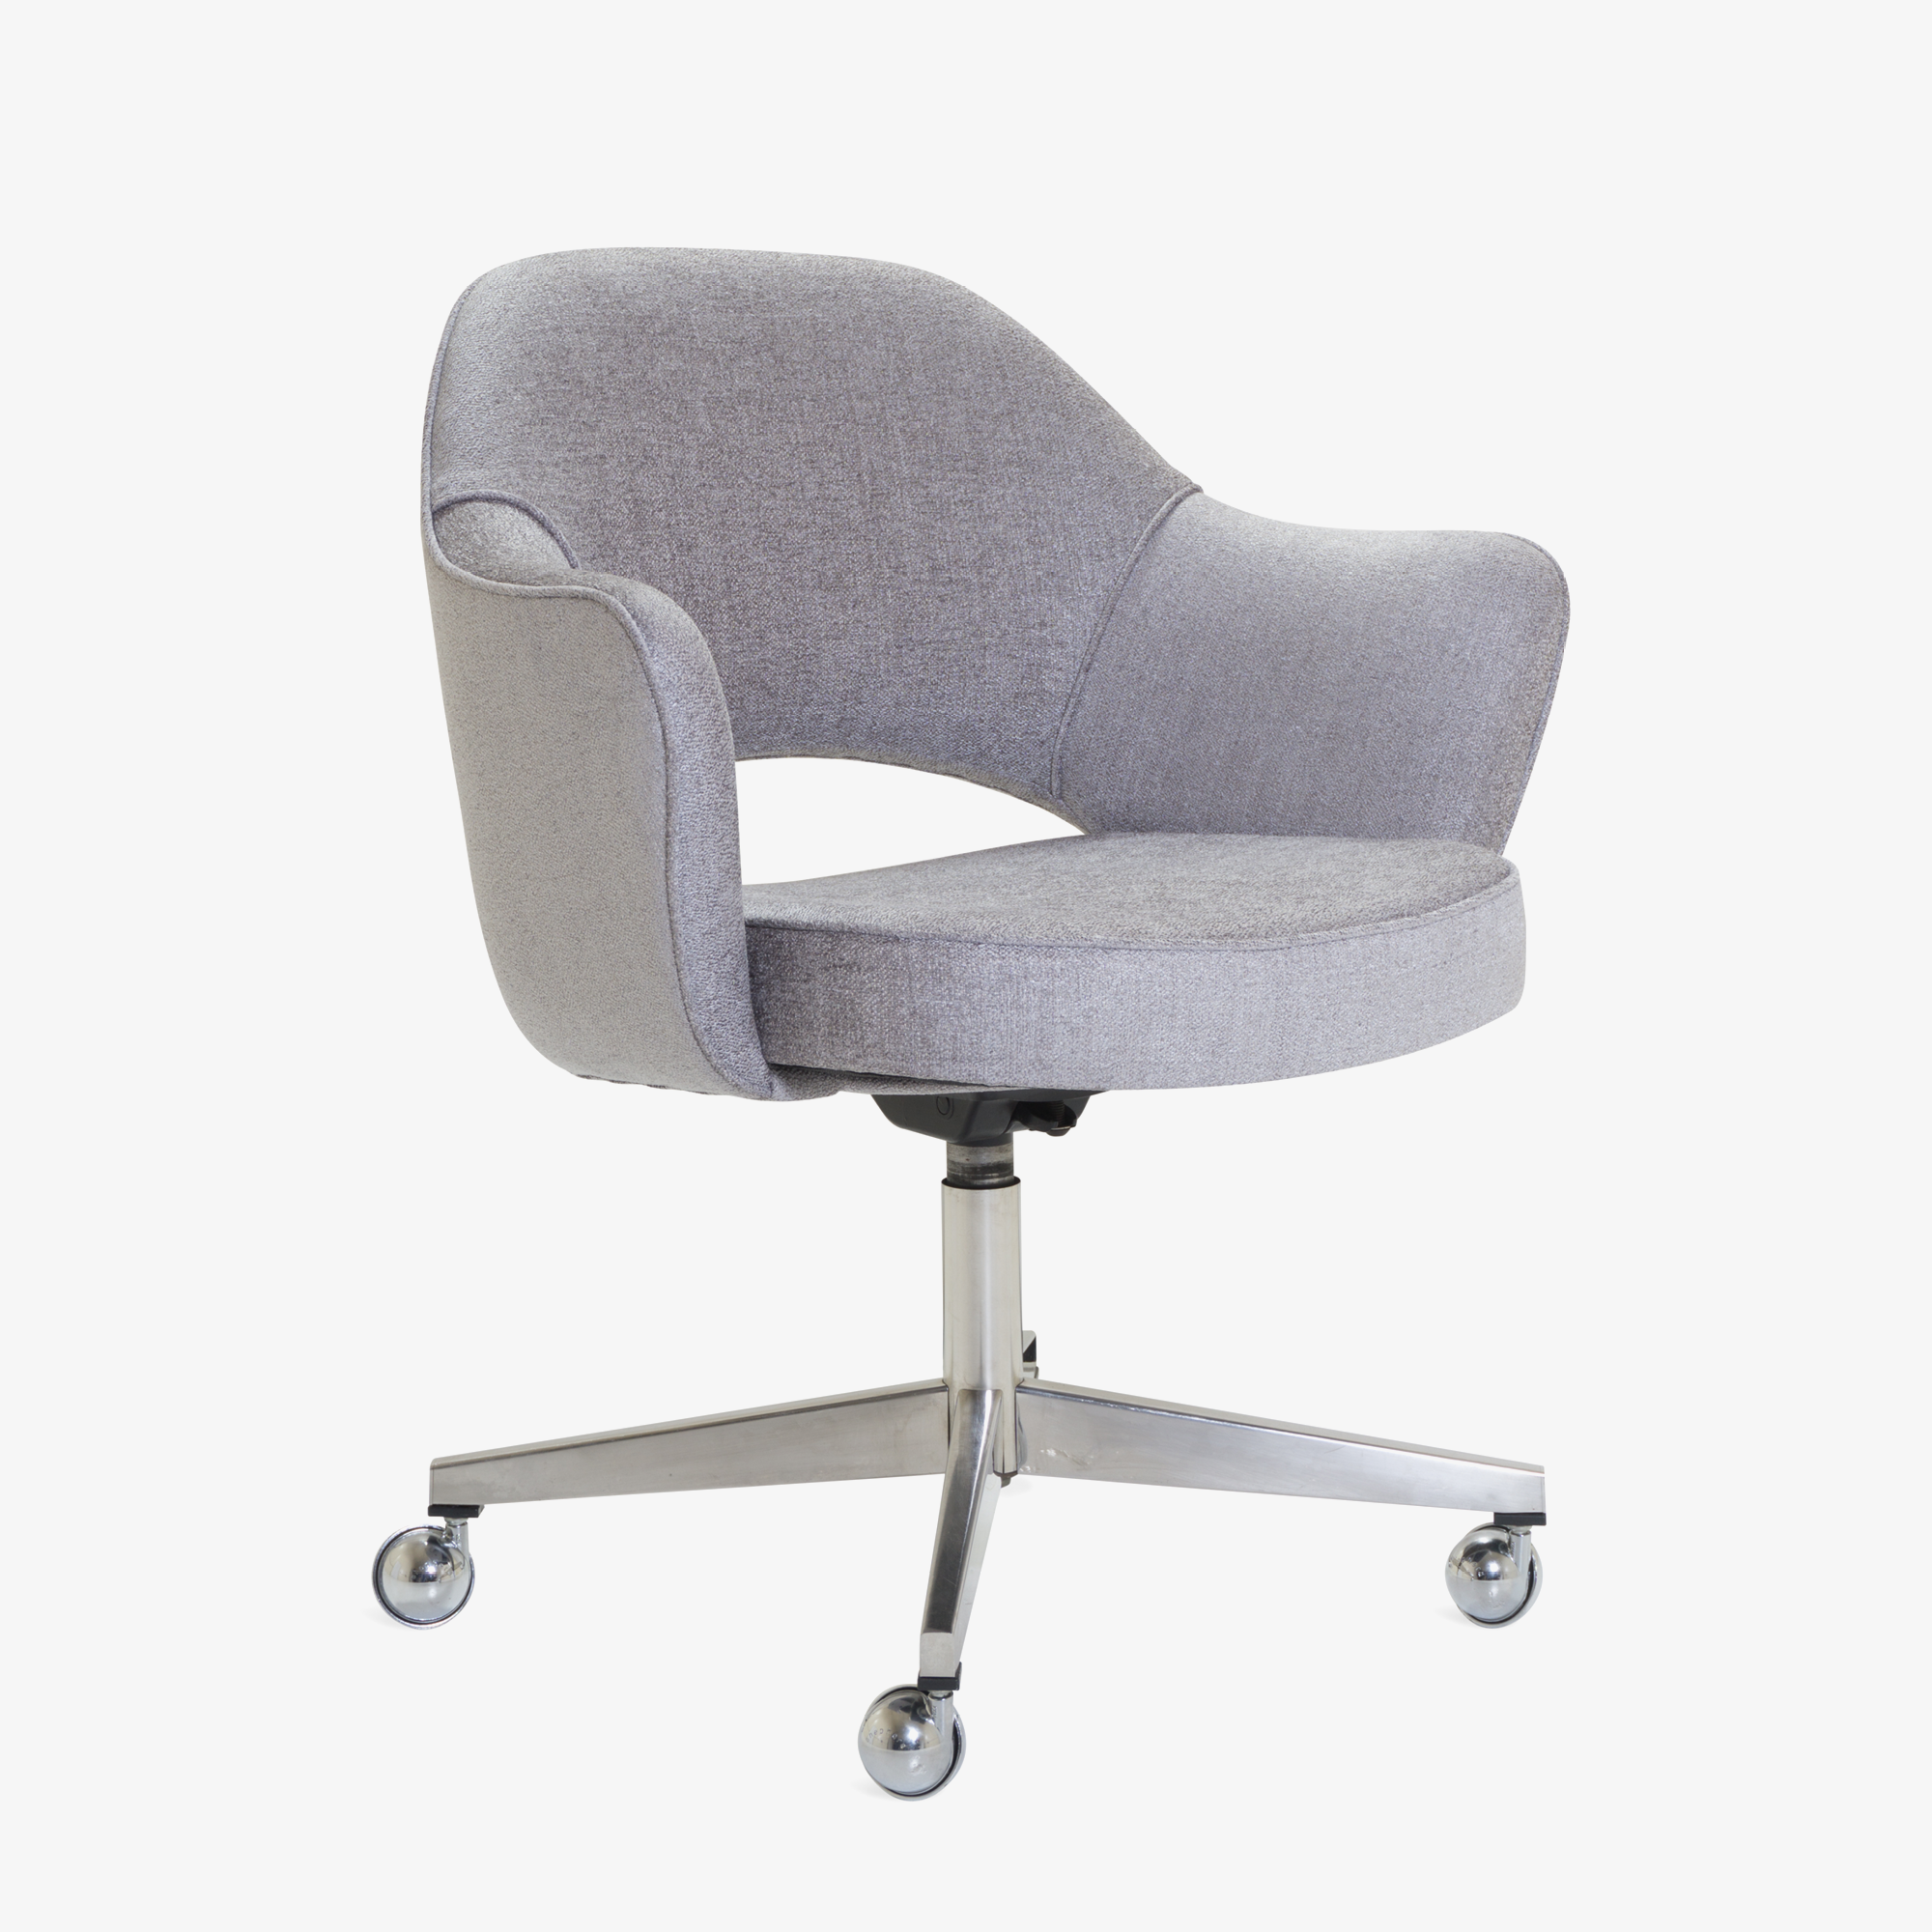 Saarinen Executive Arm Chair in Sterling, Swivel Base.png